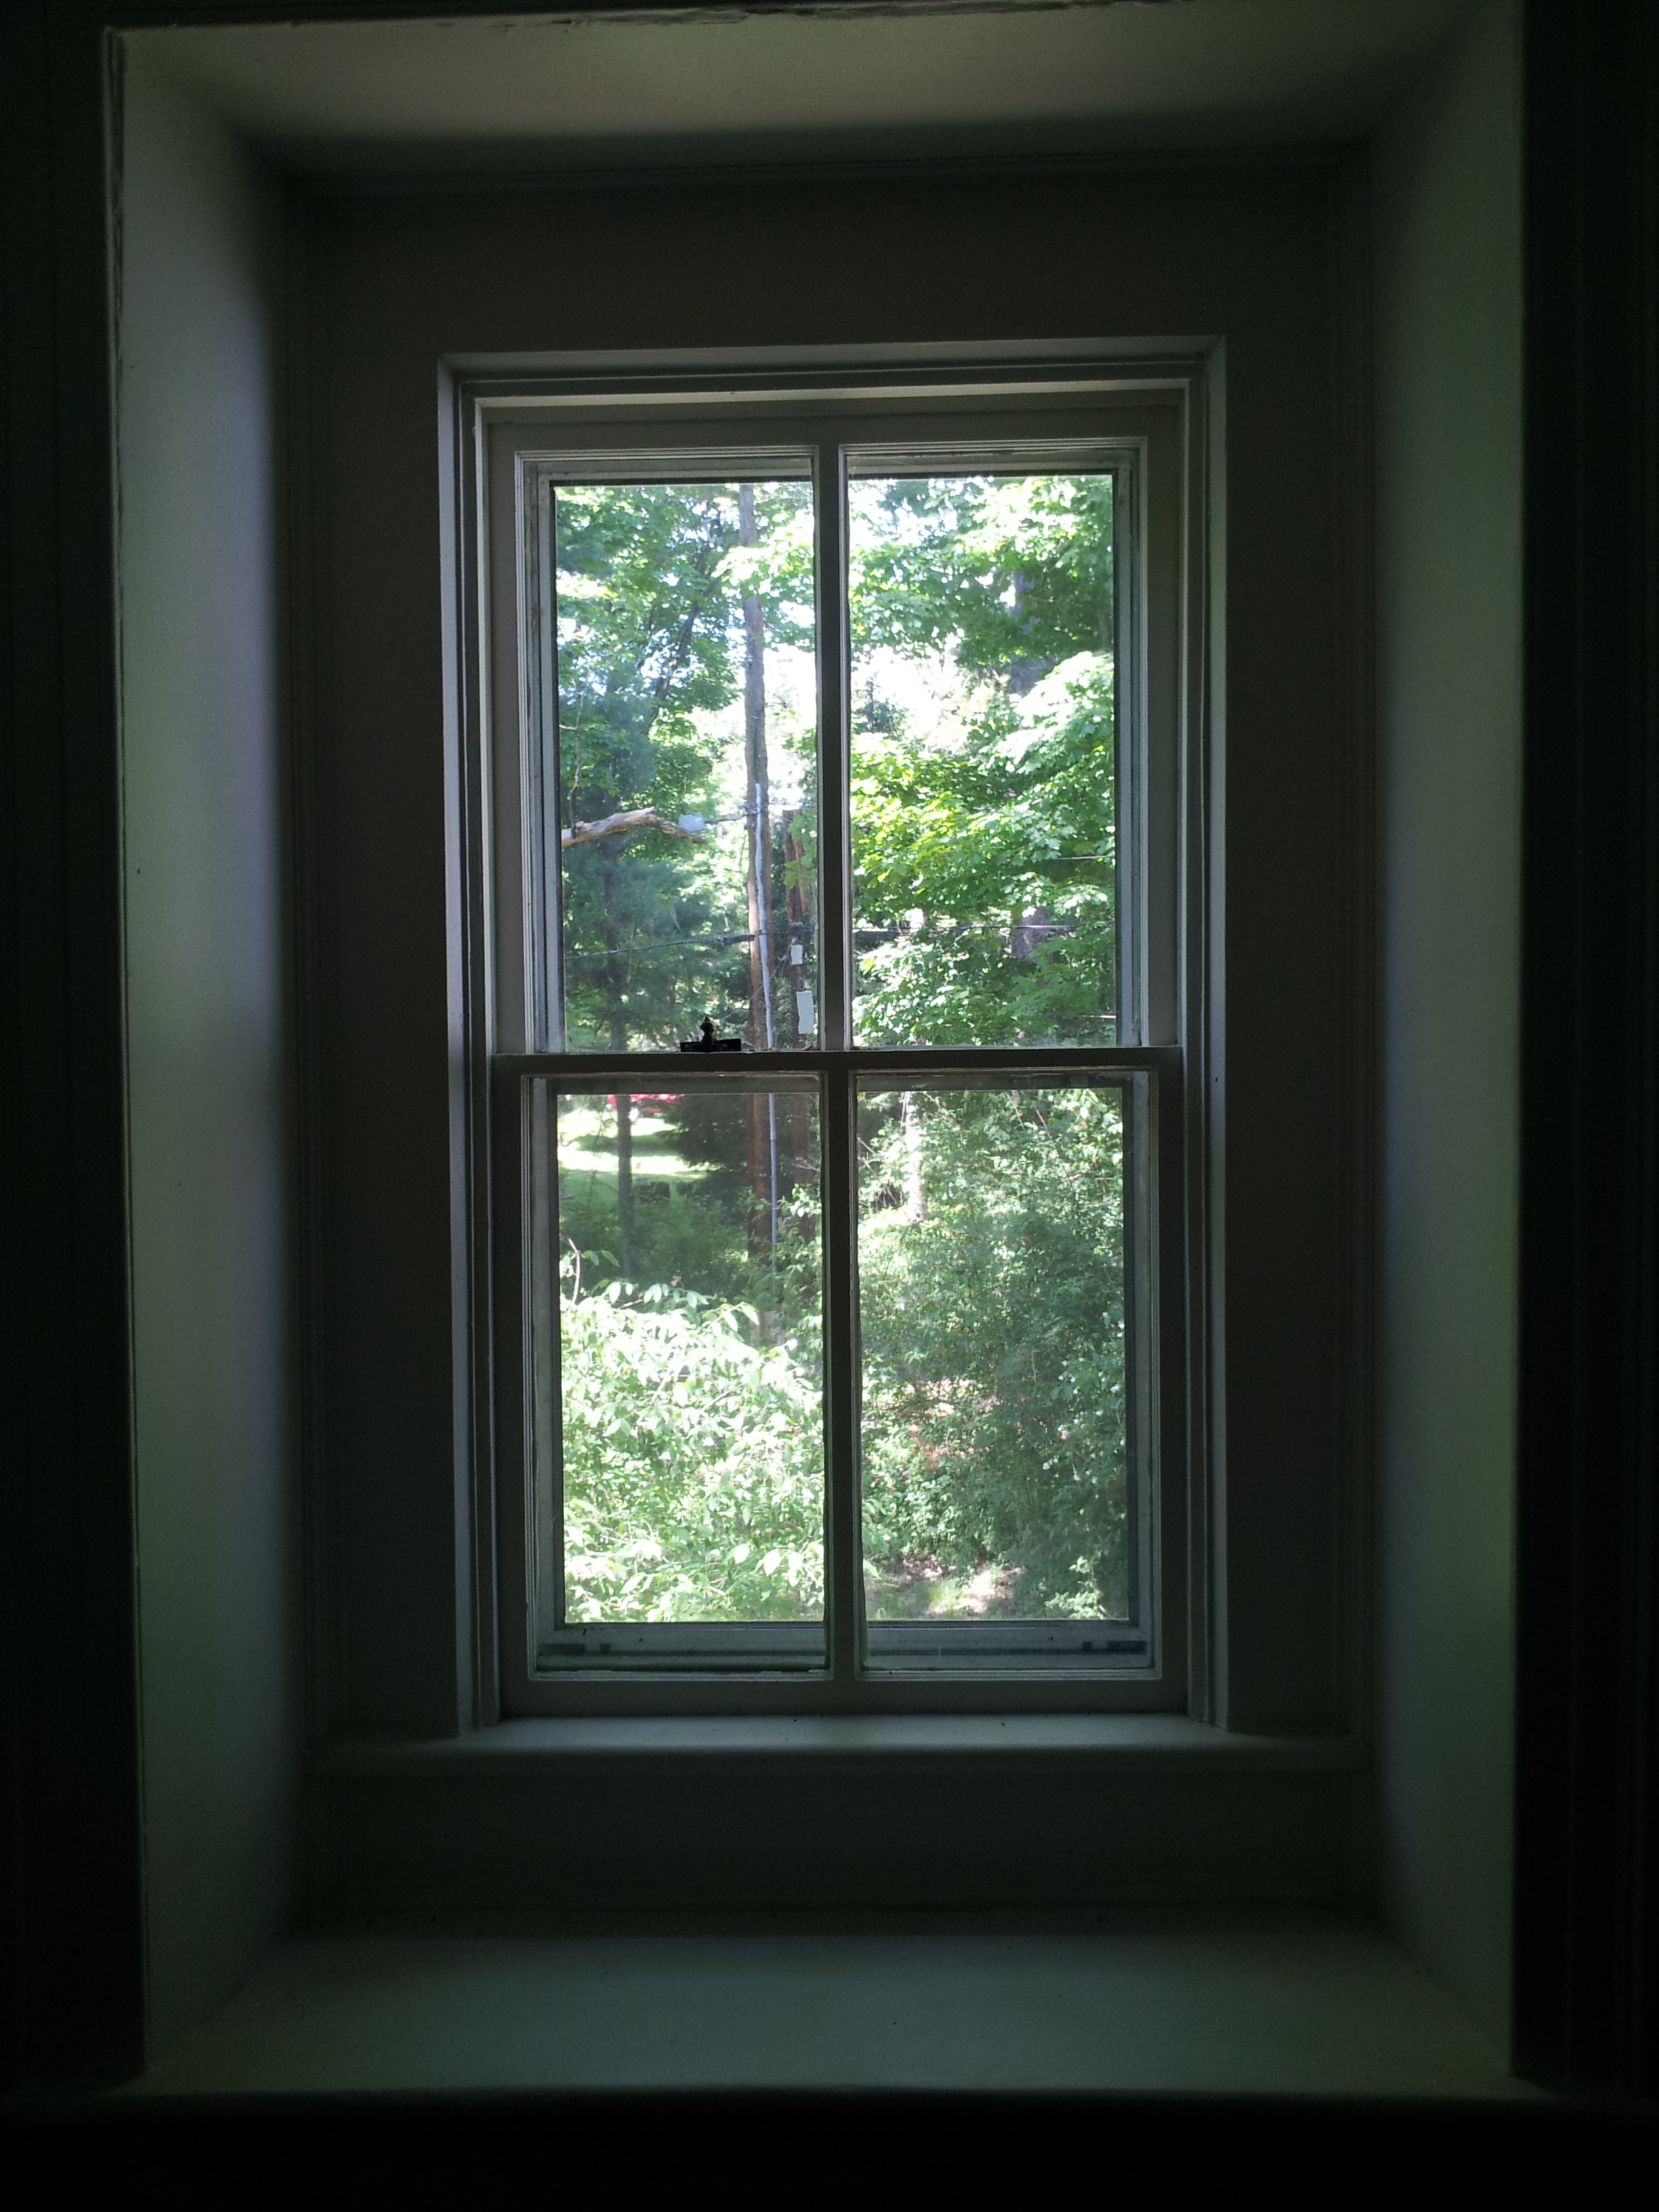 A window in an 18th Century Dutch stone cottage in Woodstock, New York looking out on the green of the surrounding forest.